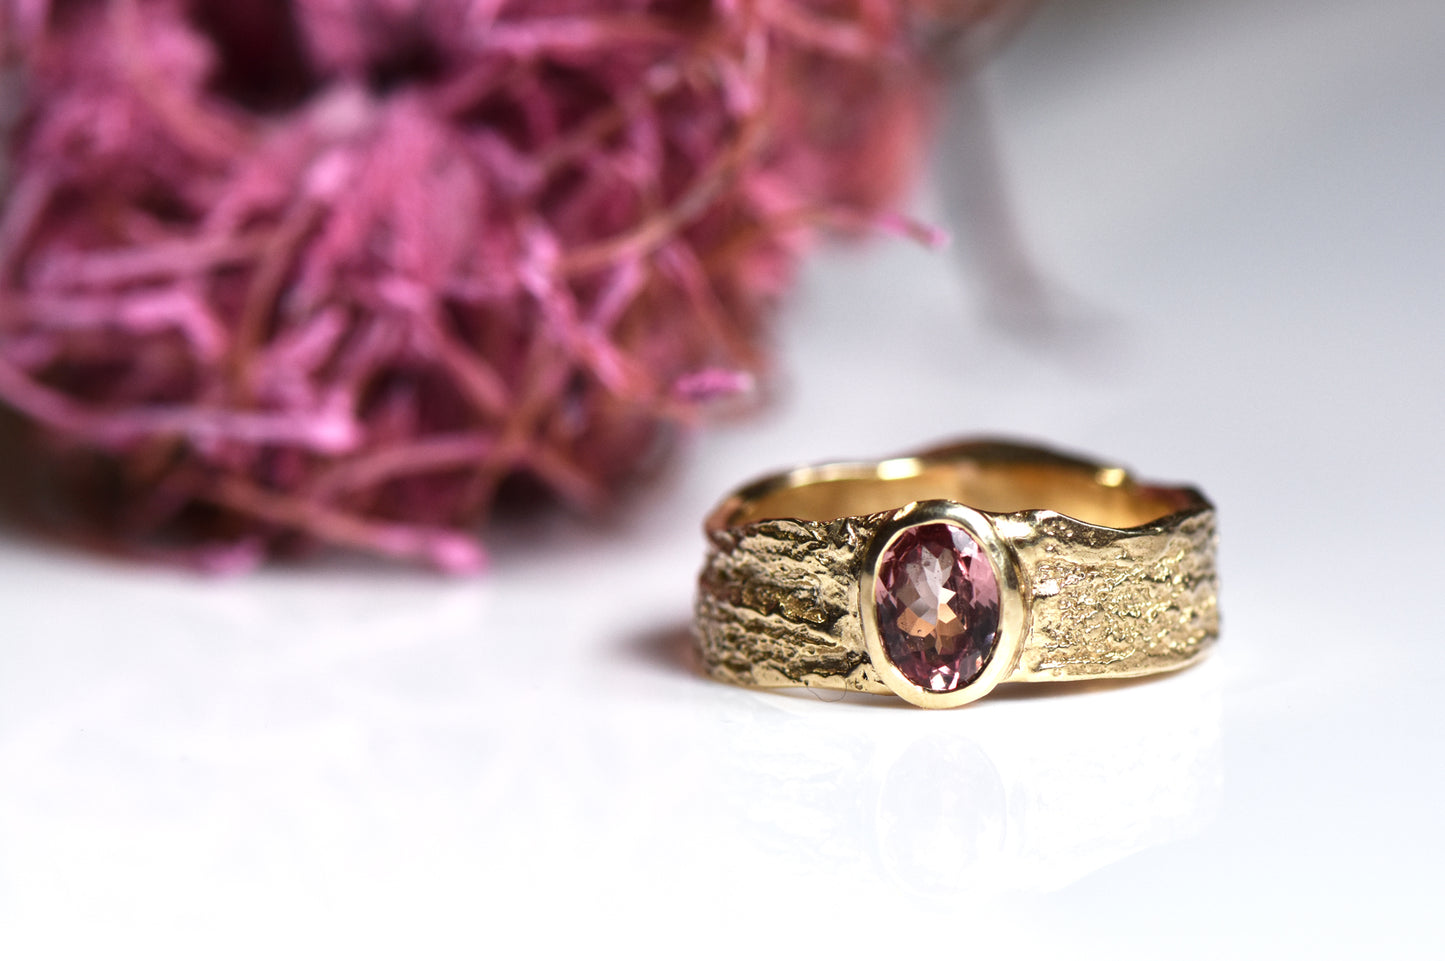 9ct Gold London Plane Ring with Pink Sapphire